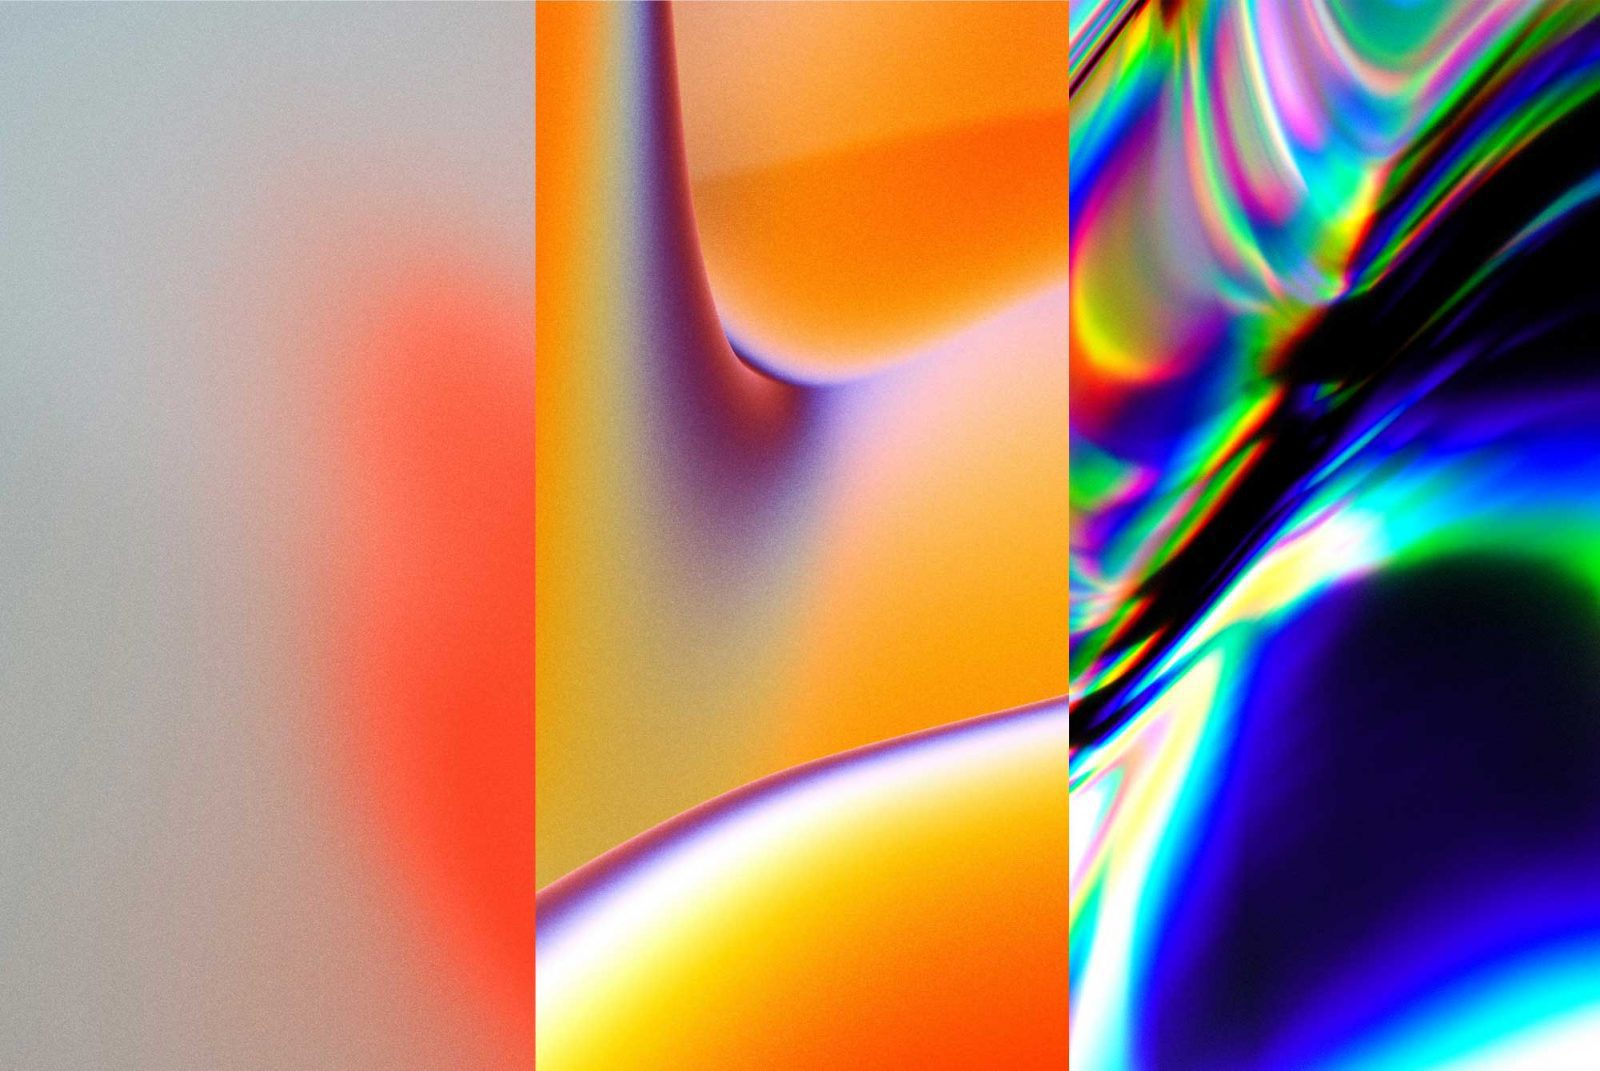 Colorful abstract graphic design with fluid shapes and gradients for creative assets, template background, and modern digital art.